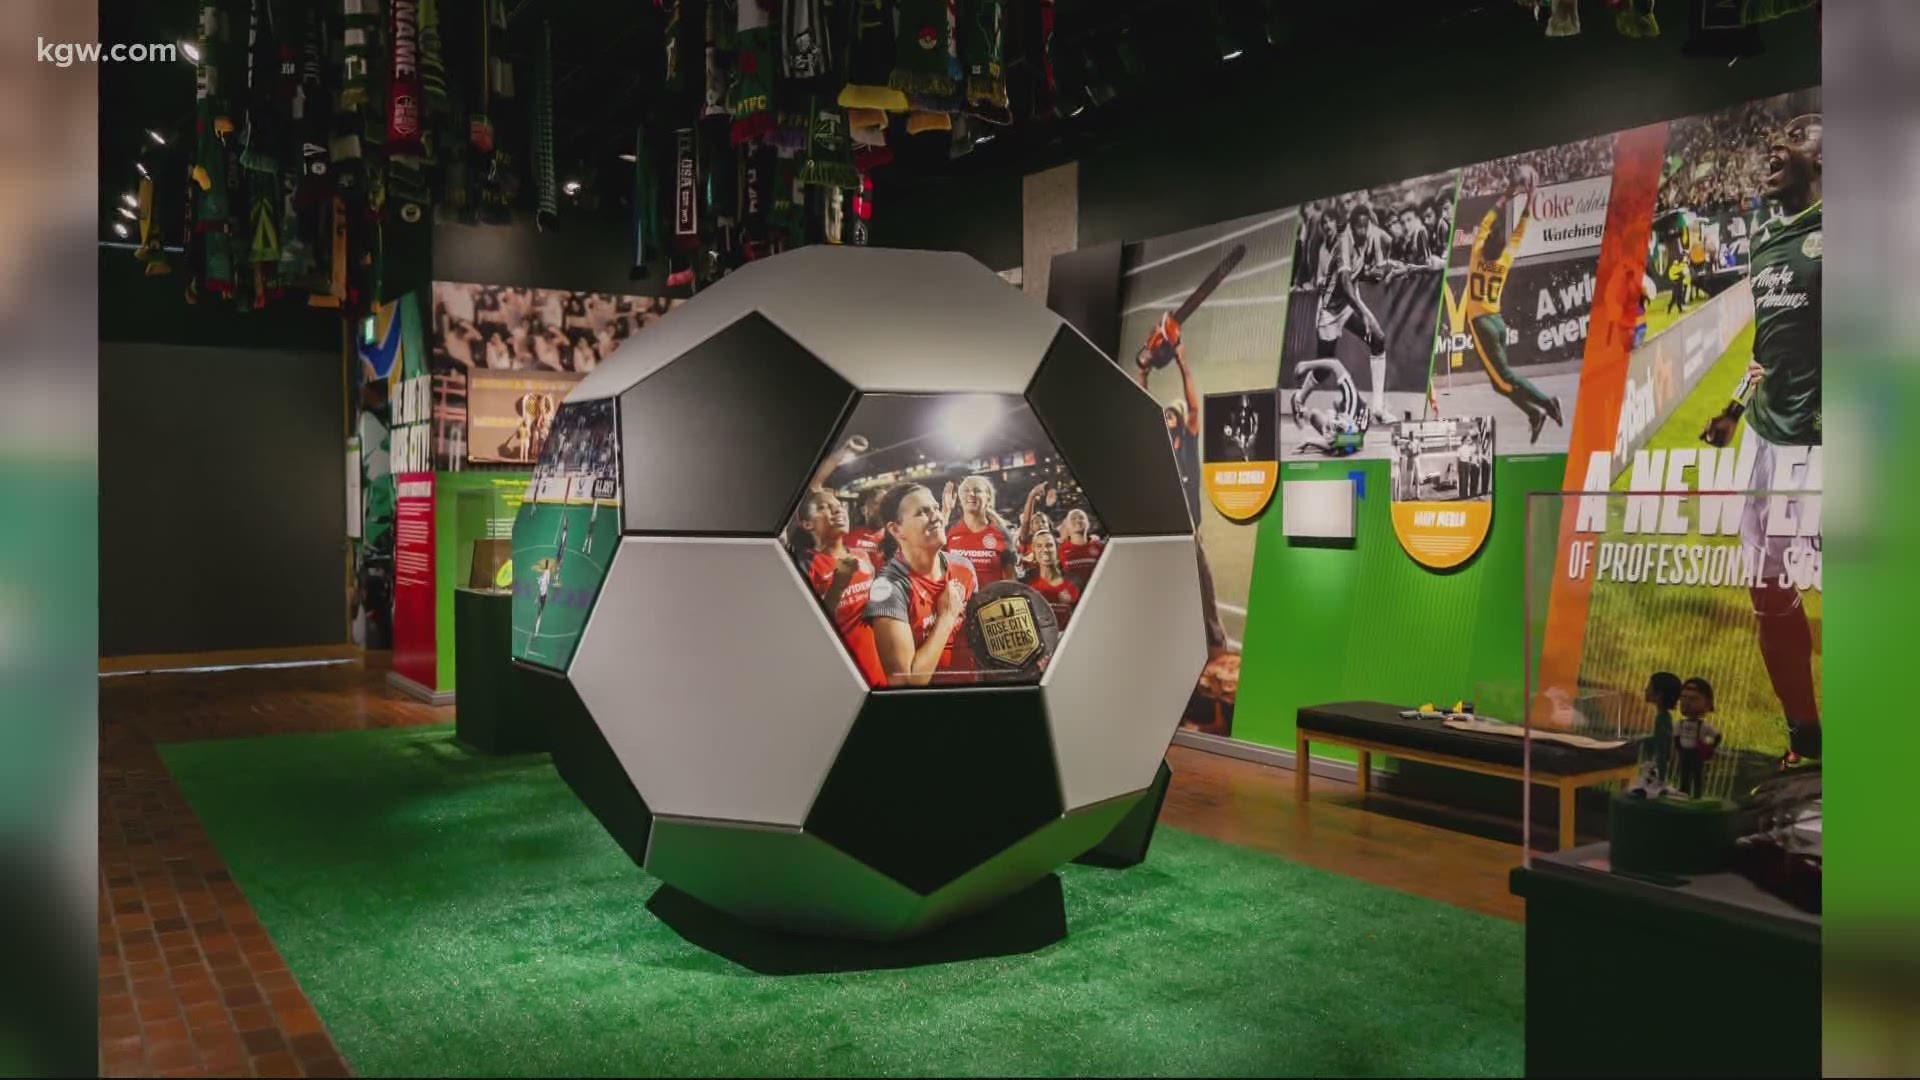 The exhibit is called "We are the Rose City: A History of Soccer in Portland." It opens on Friday, July 24.